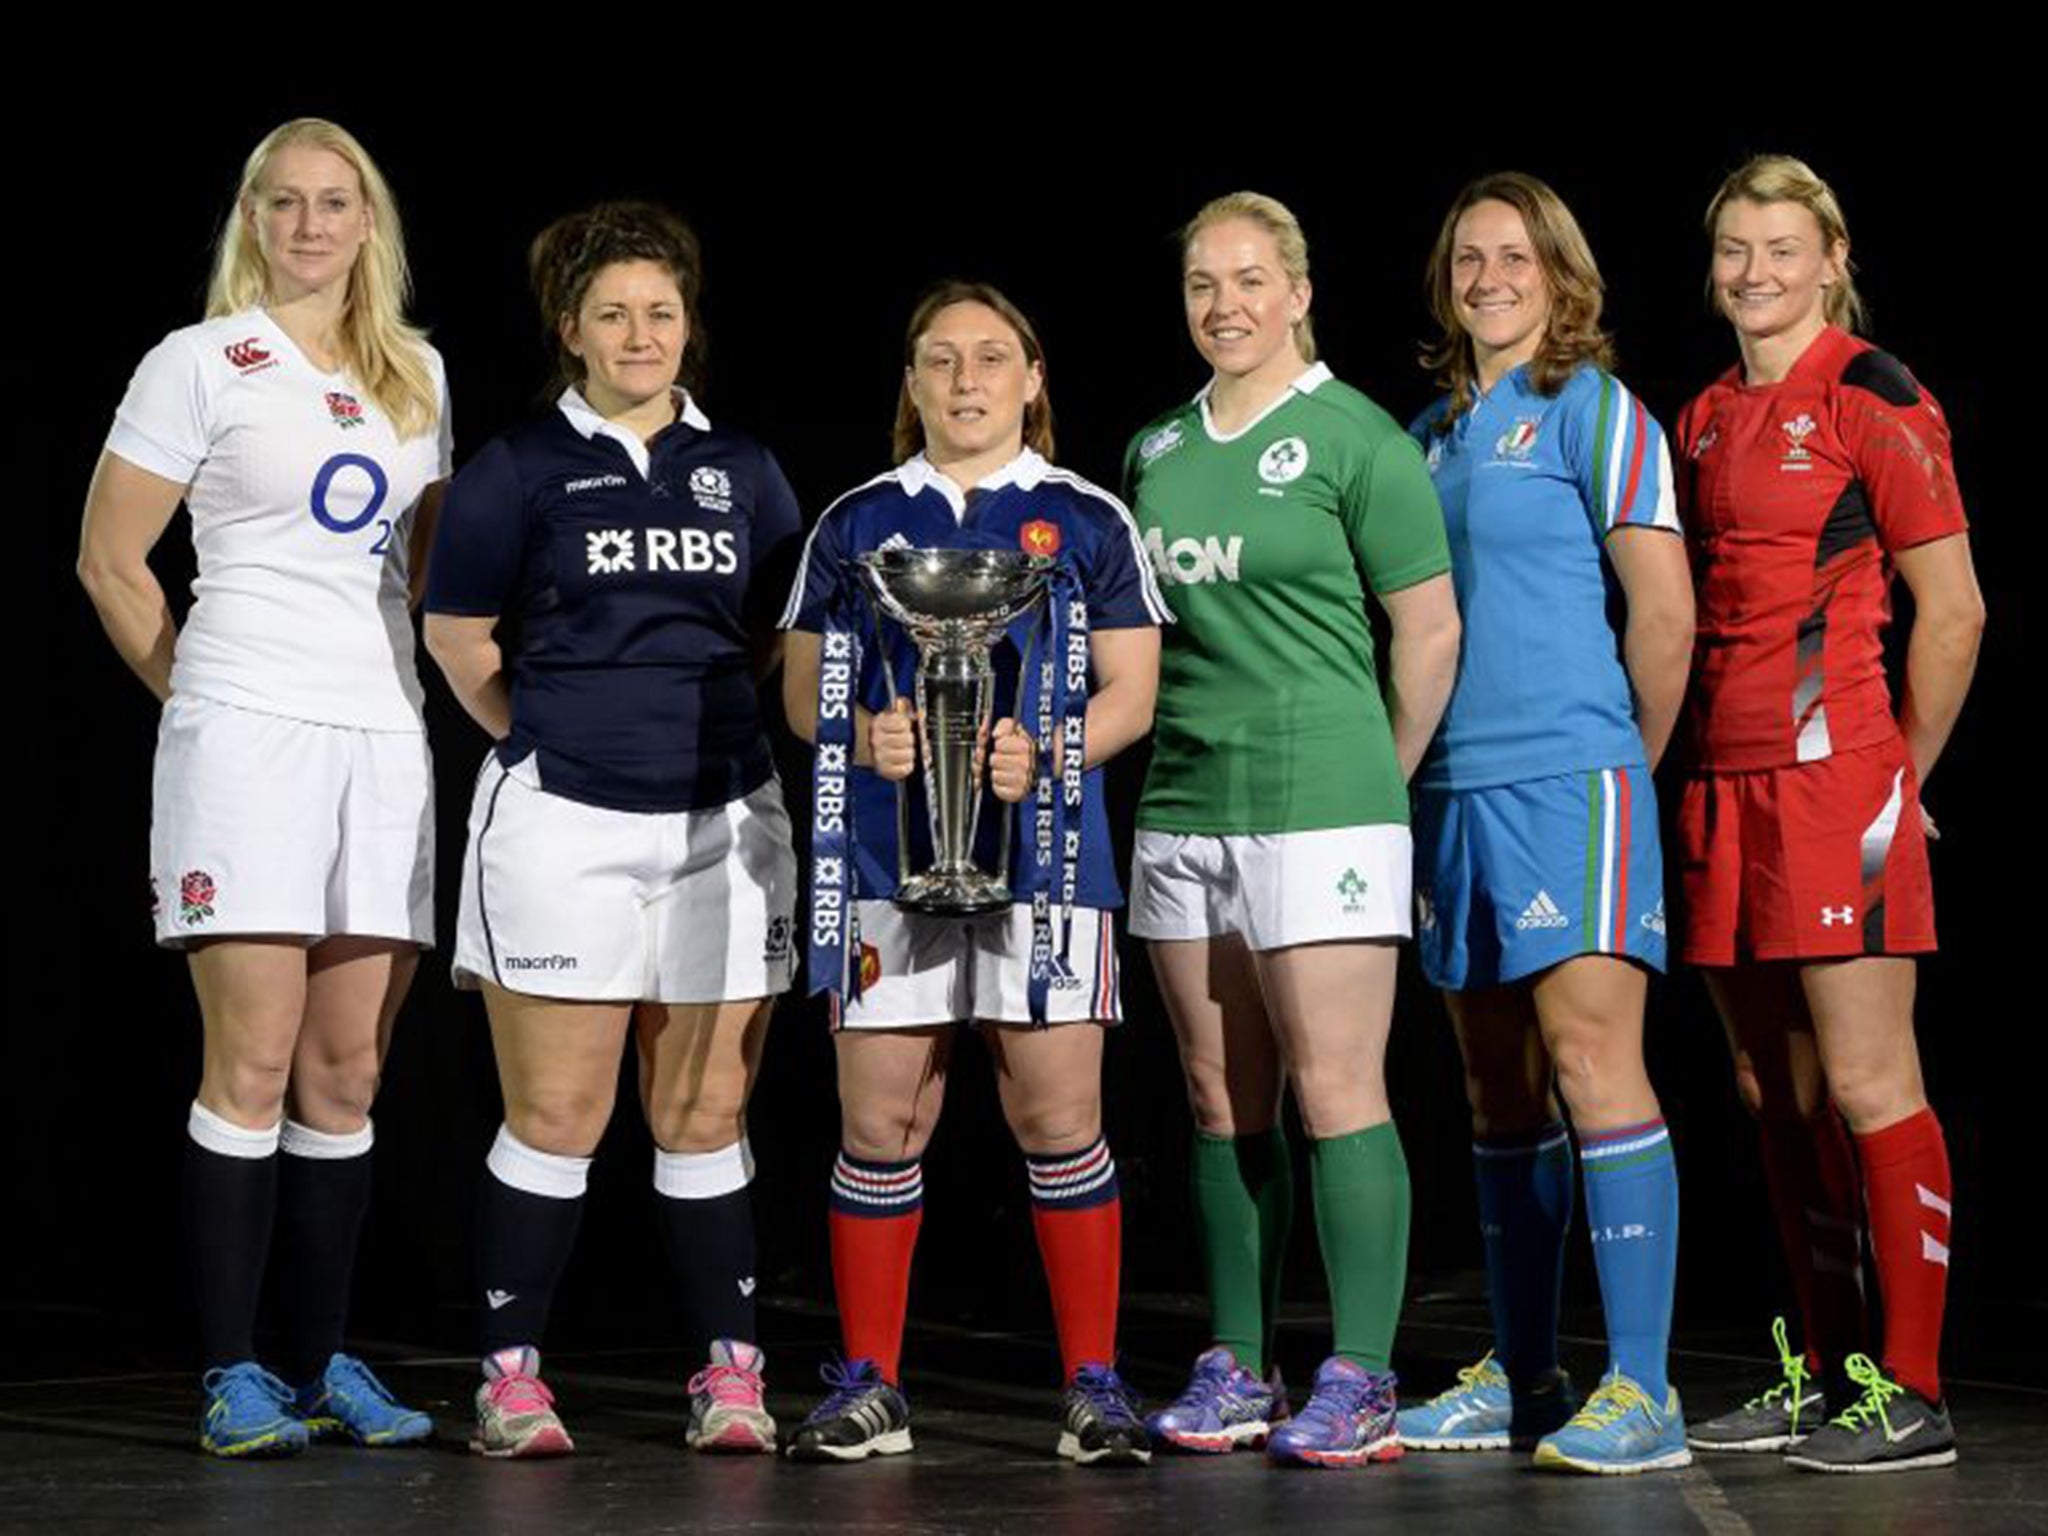 (Left to right) Tamara Taylor of England, Scotland’s Tracy Balmer, Gaëlle Mignot of France, Ireland’s Niamh Briggs, Silvia Gaudino of Italy and Rachel Taylor of Wales pose with the trophy